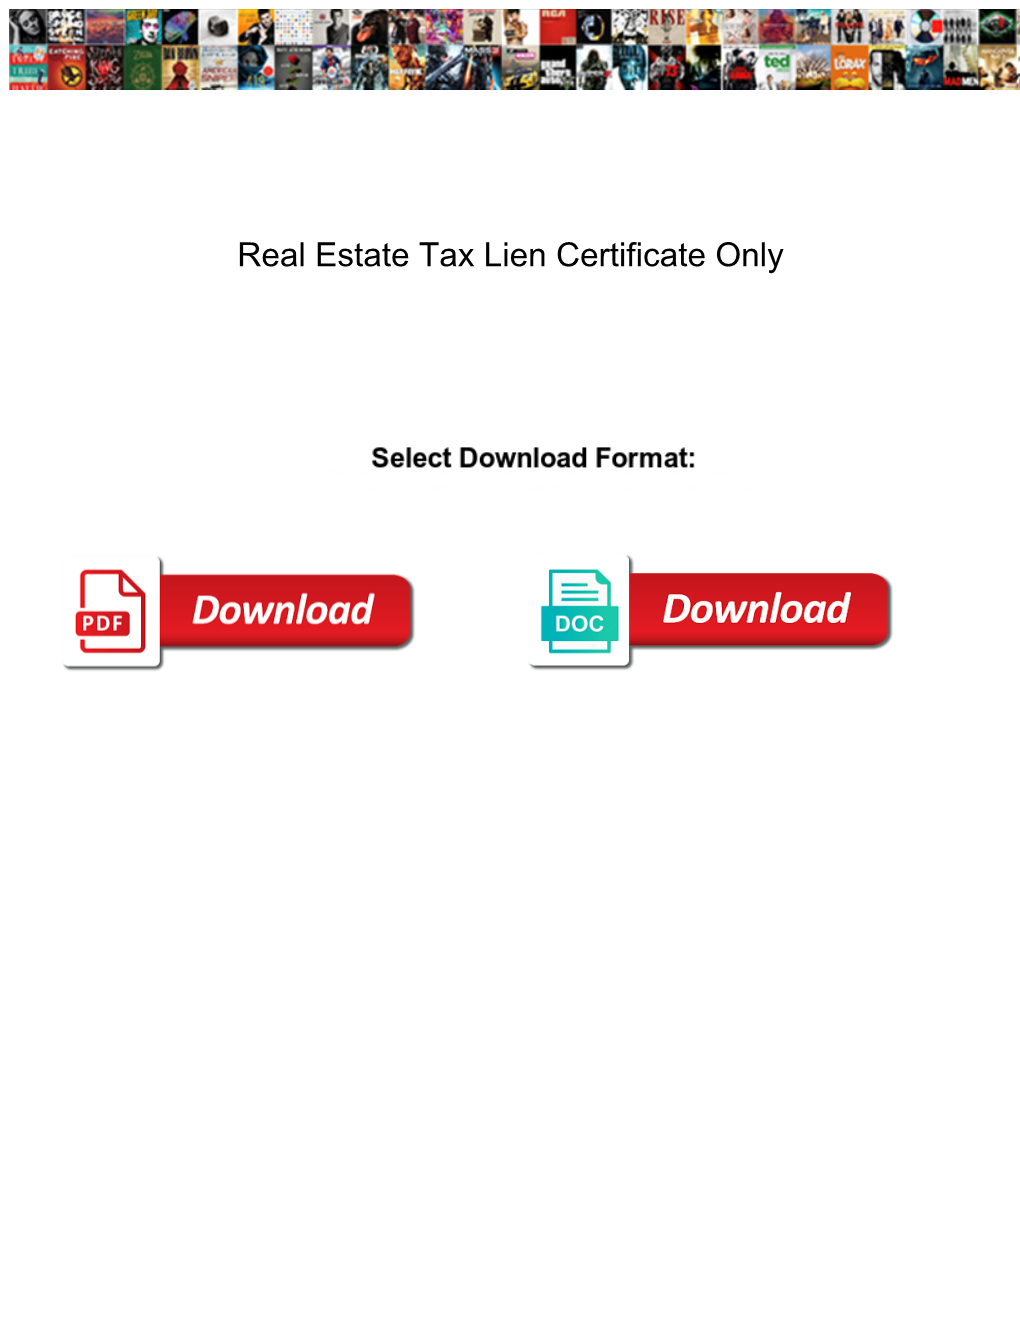 Real Estate Tax Lien Certificate Only